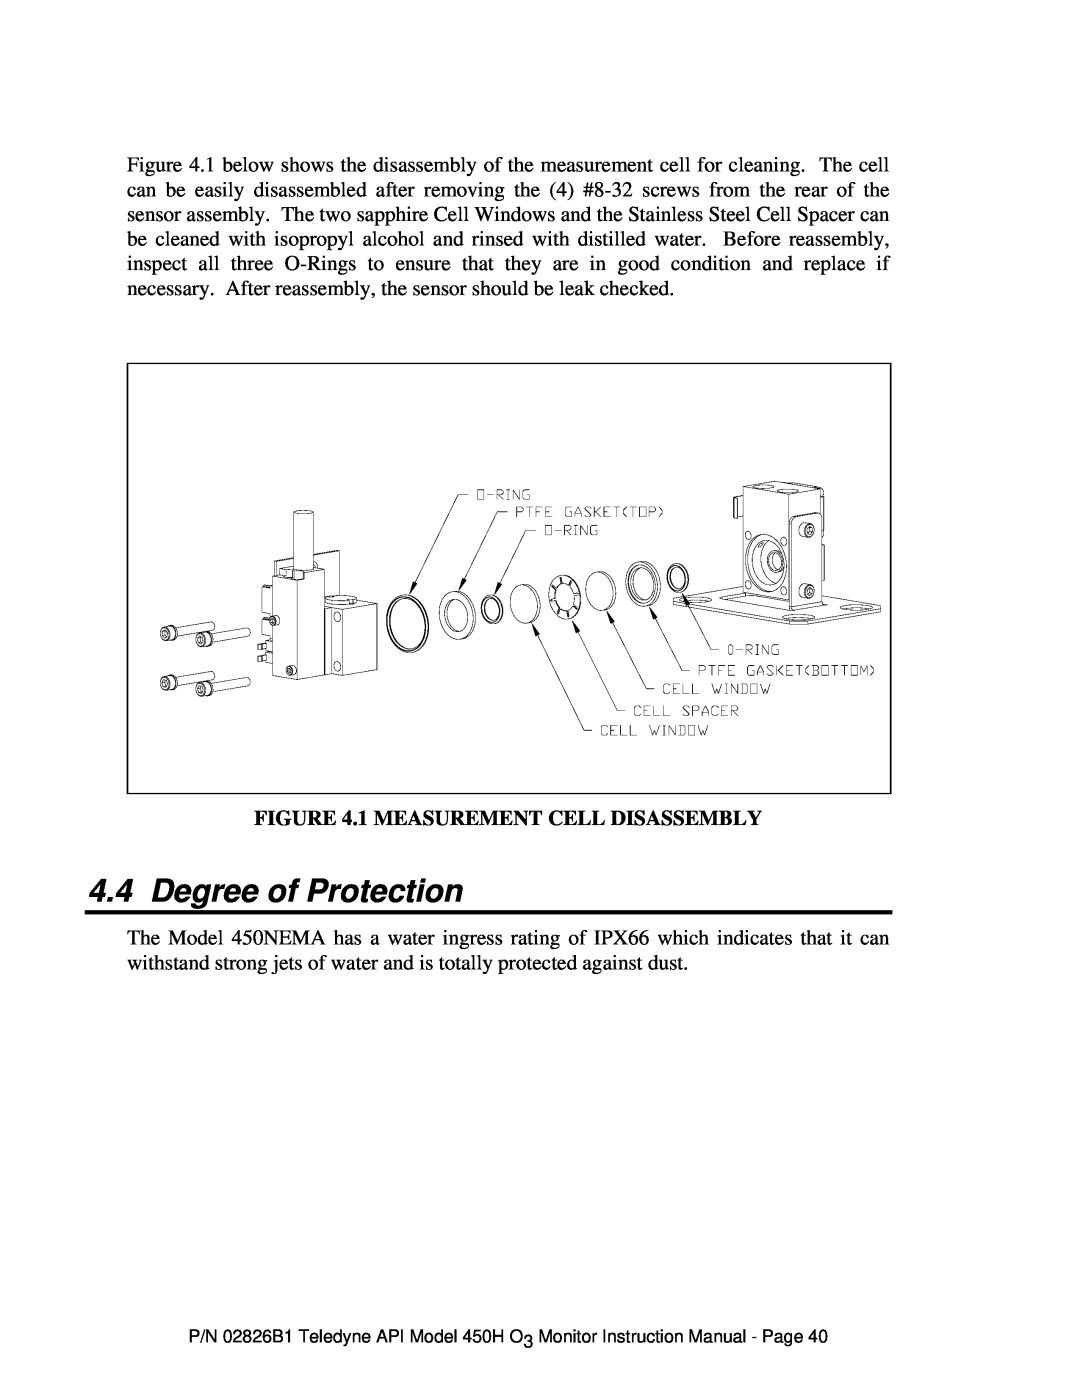 Teledyne 450H instruction manual Degree of Protection, 1 MEASUREMENT CELL DISASSEMBLY 